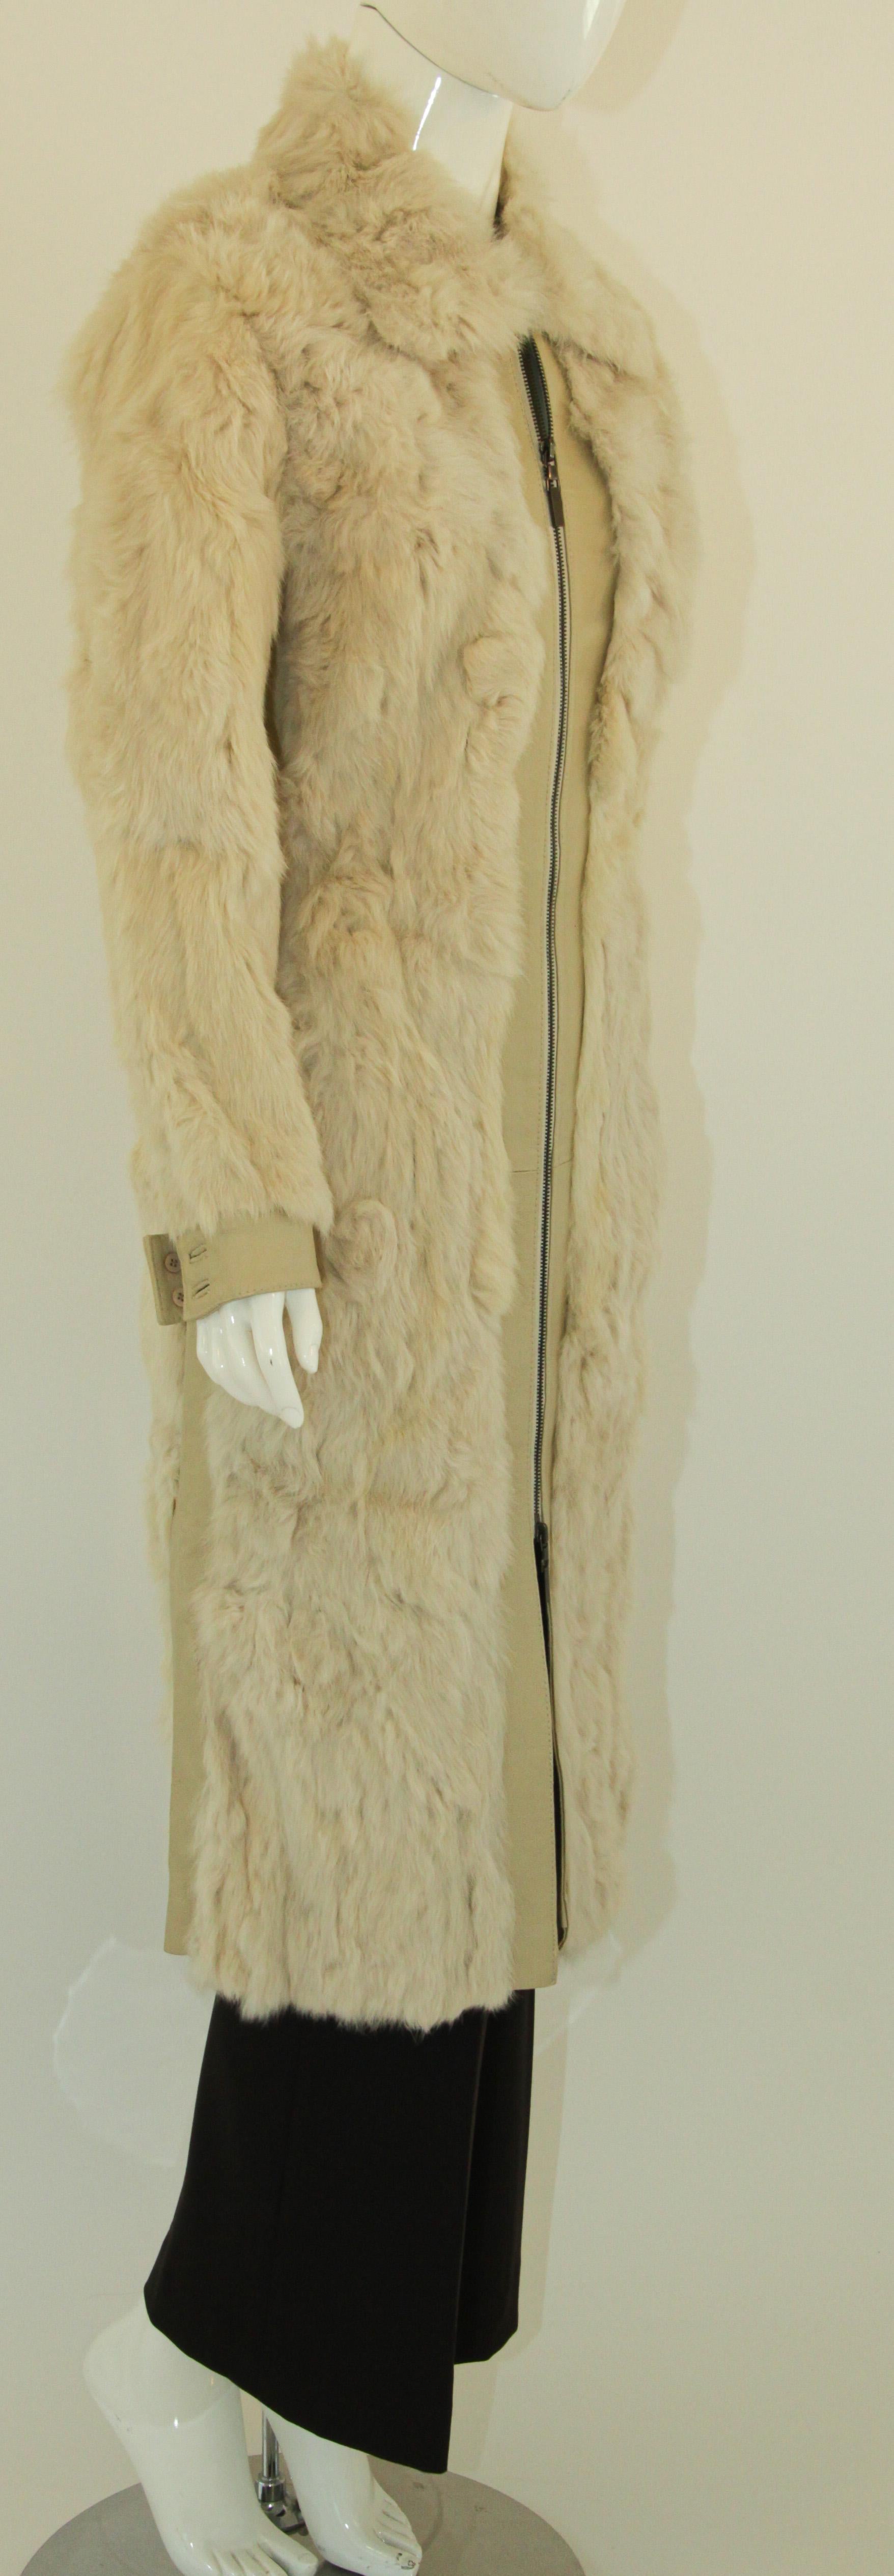 Women's or Men's White Leather and Fur Vintage Coat with Zipper 1970's For Sale